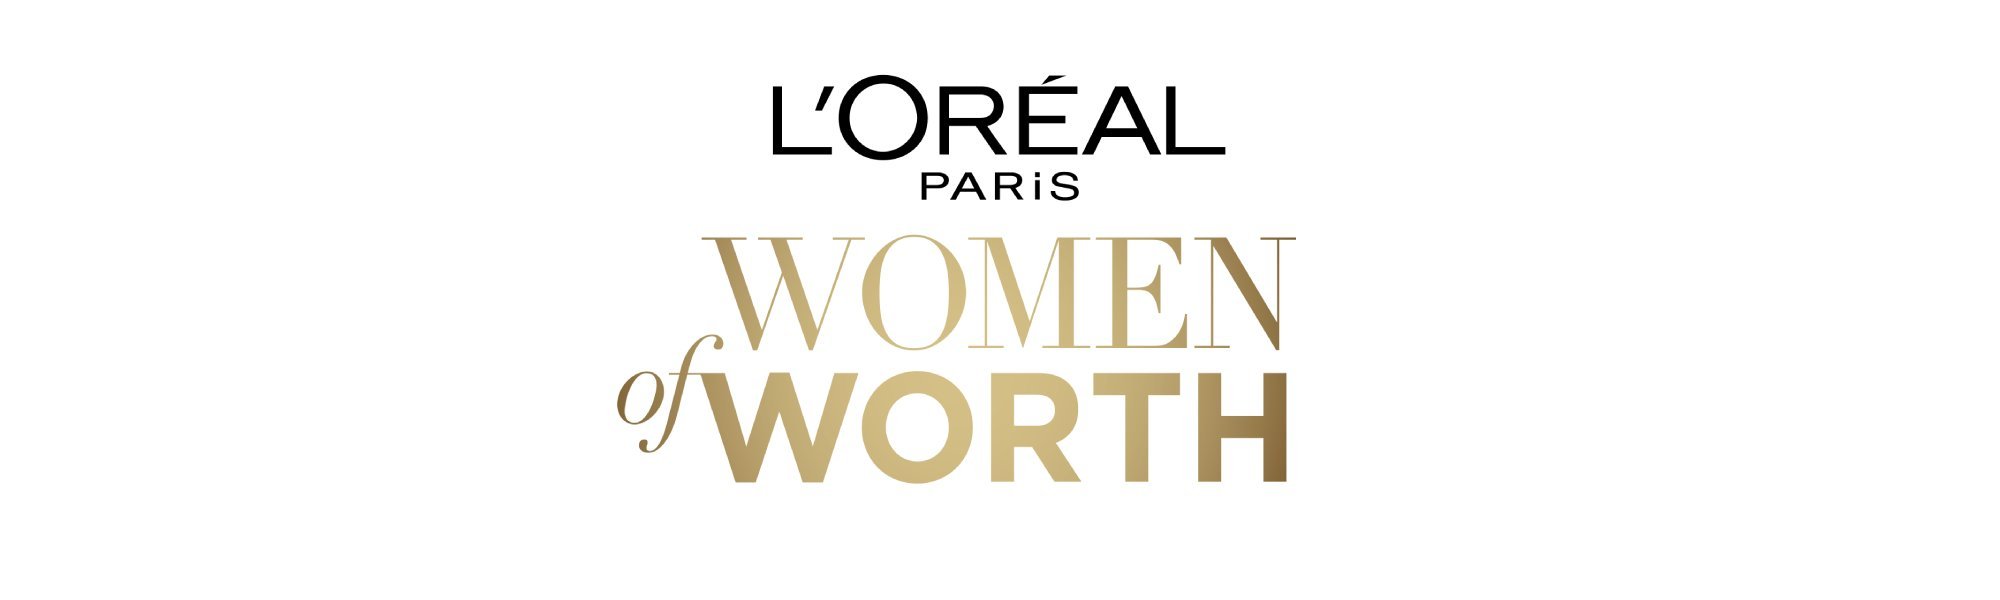 Loreal Paris About Women Of Worth 2000x900 V2